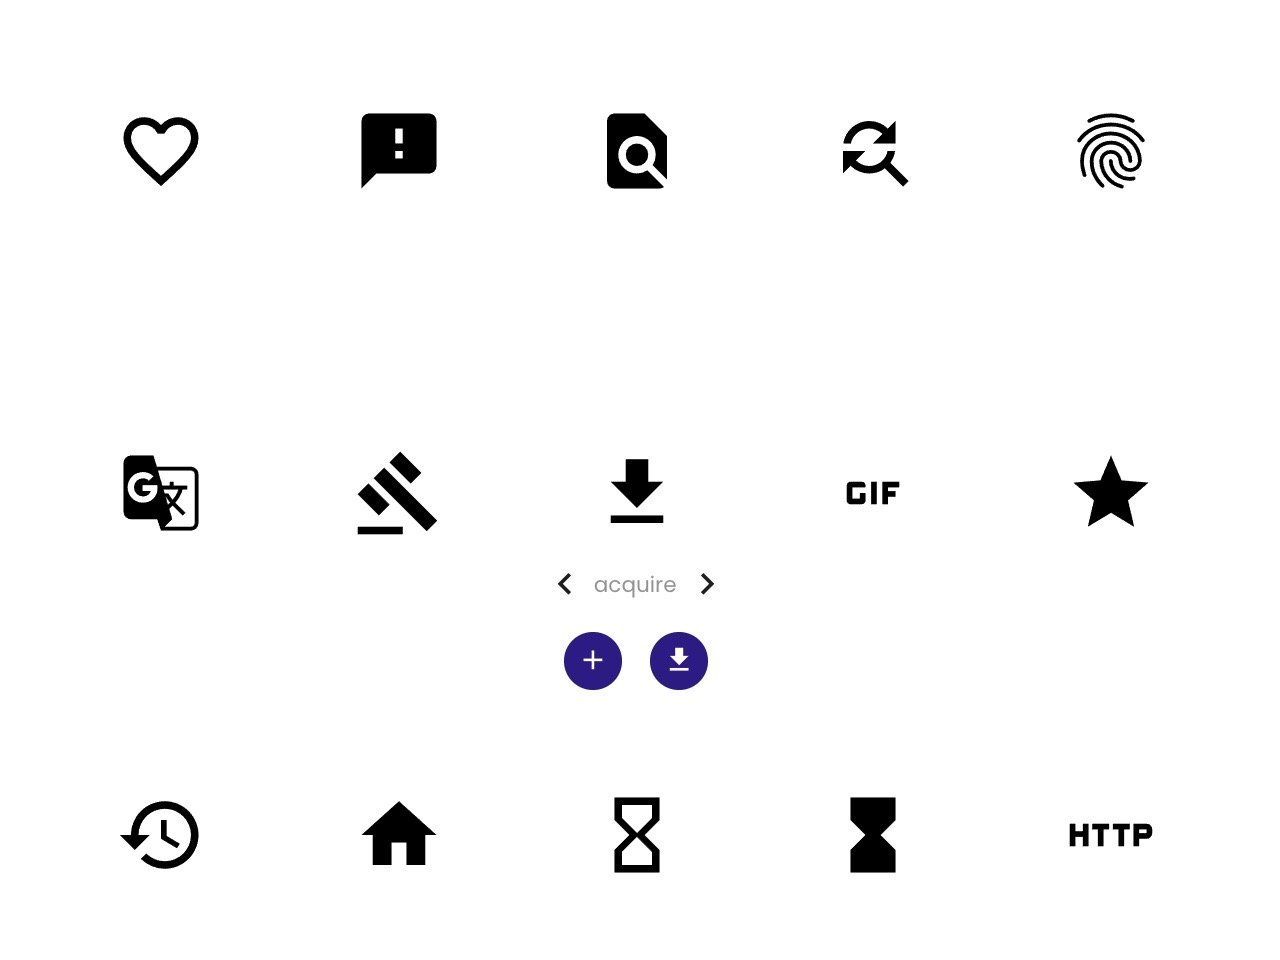 Free Icons by Iconshock